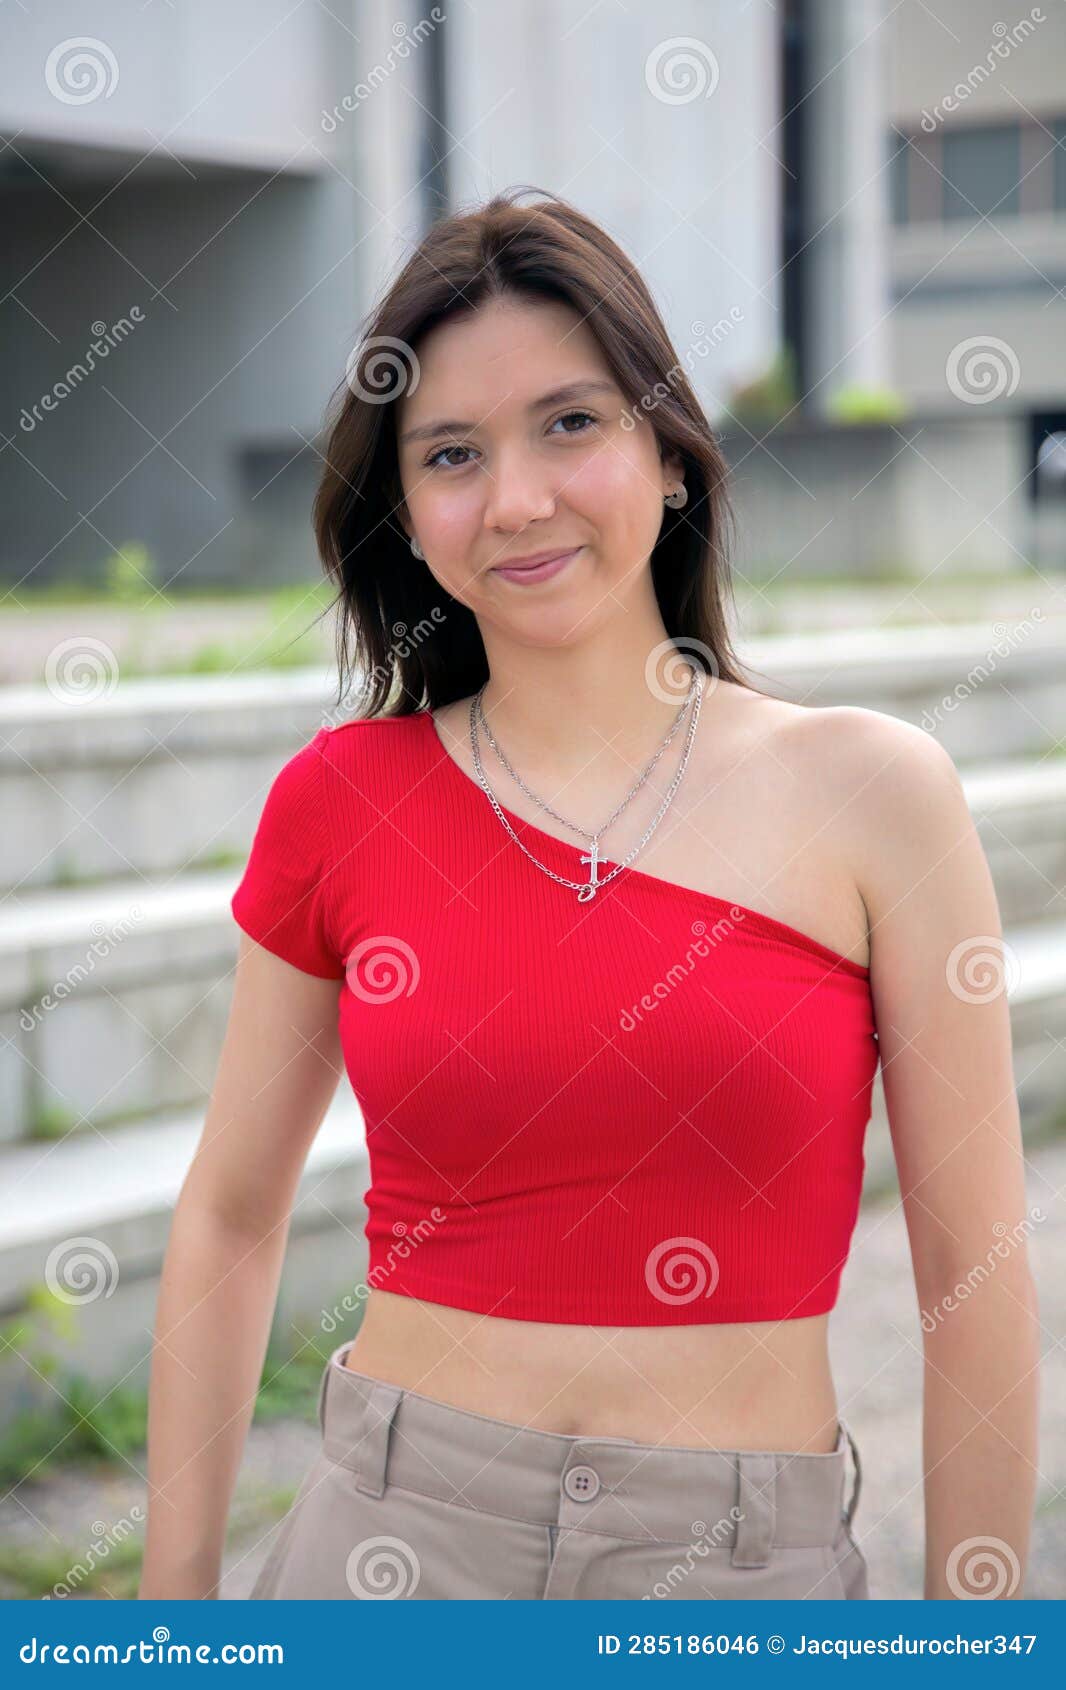 https://thumbs.dreamstime.com/z/woman-wearing-red-top-camisole-city-summer-young-model-woman-vivid-red-top-camisole-lifestyle-hand-her-hips-285186046.jpg